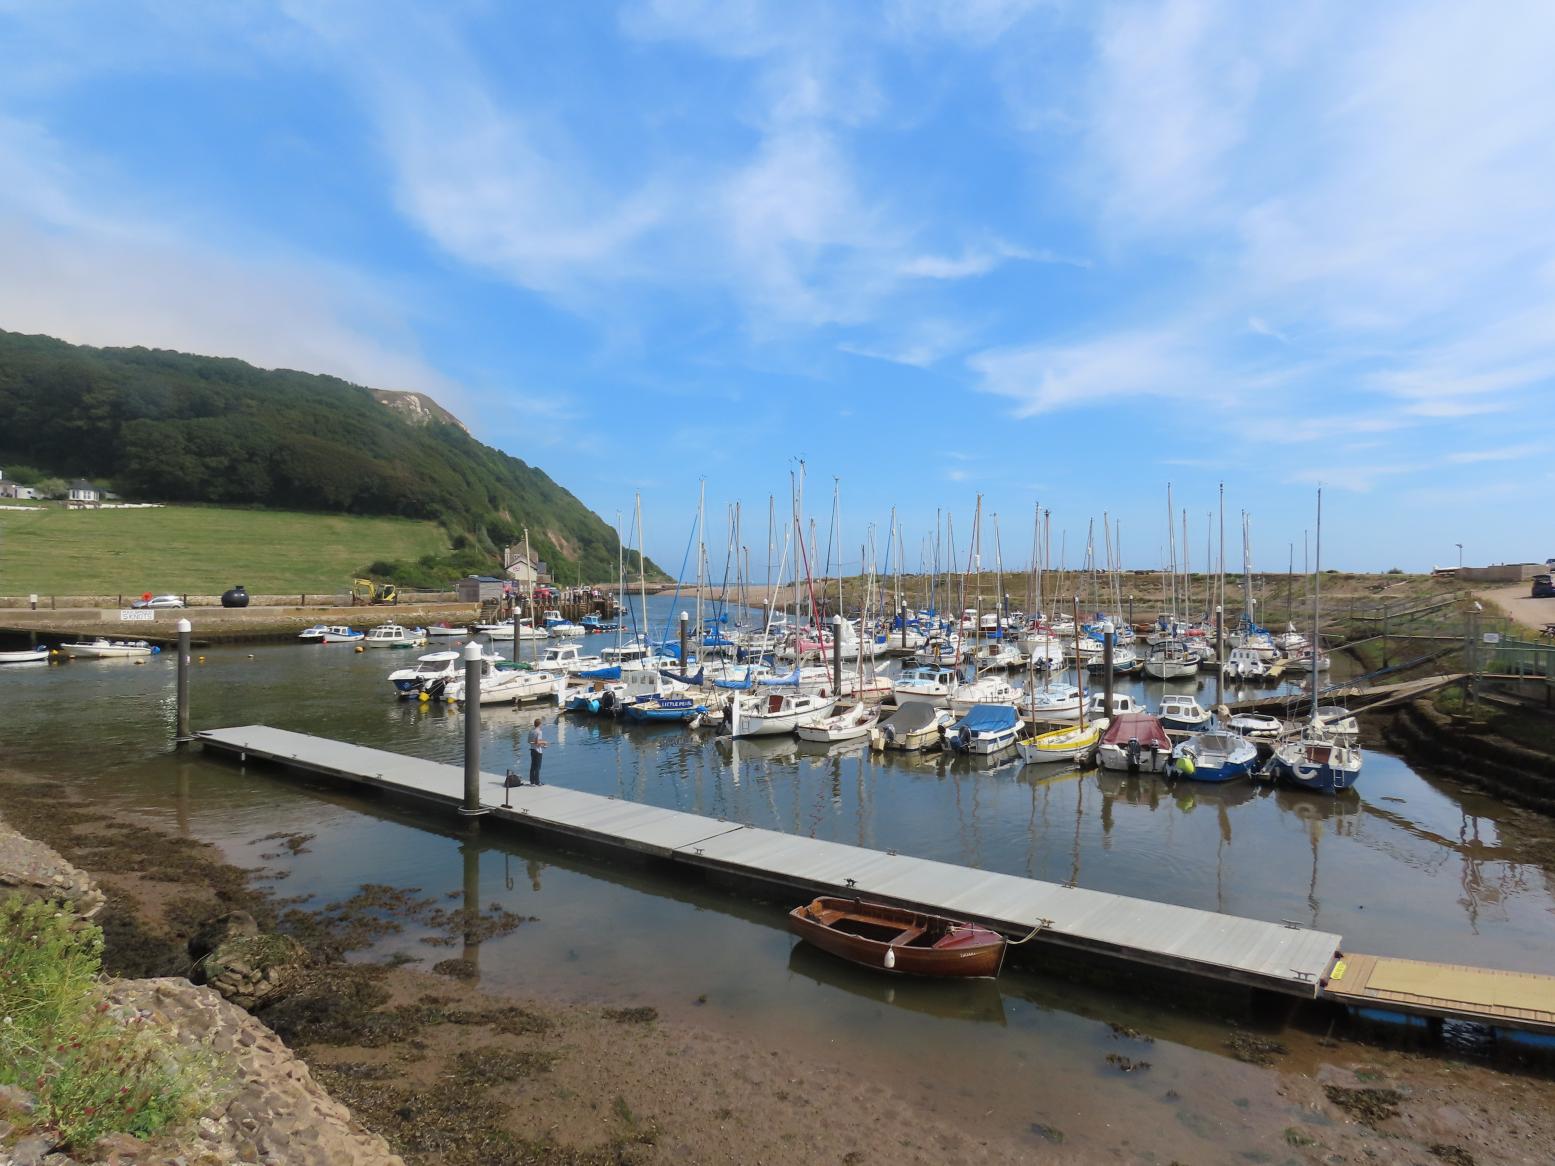 Boats in Axmouth Harbour